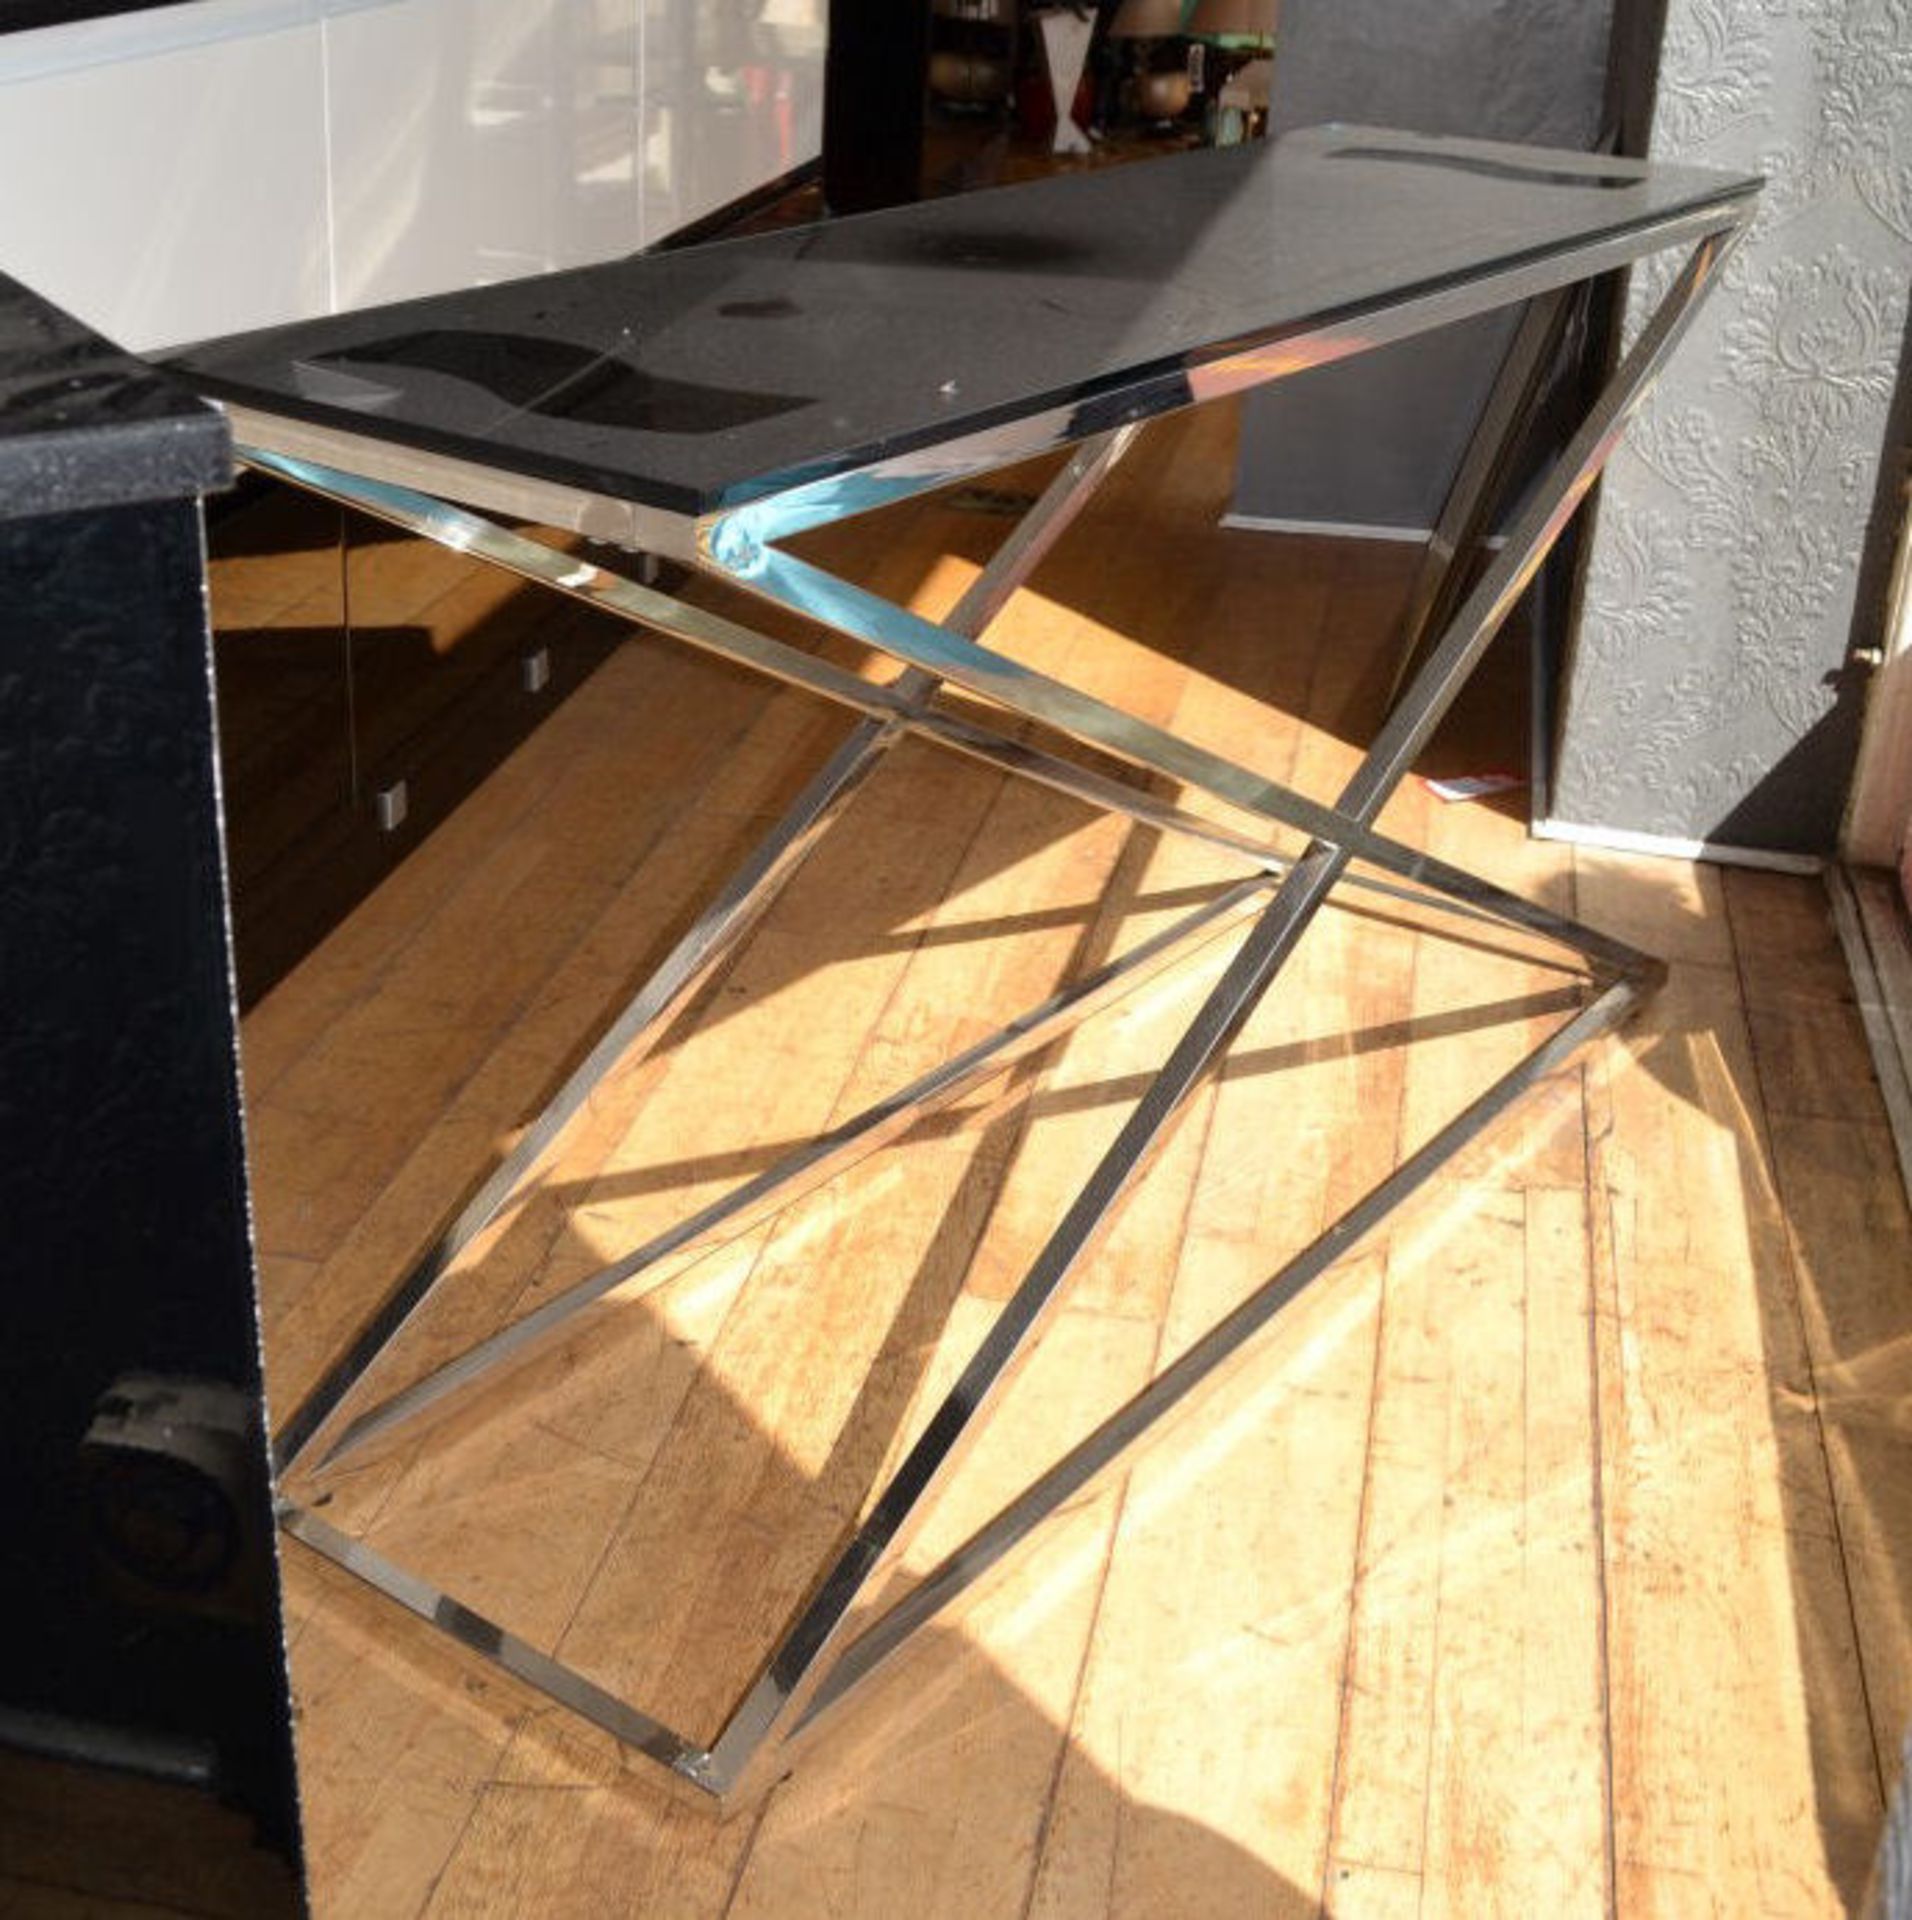 1 x Black Glass Topped Table With Silver Legs. 130X40.5cm. 74.5cm Tall. - CL108 - Image 2 of 3